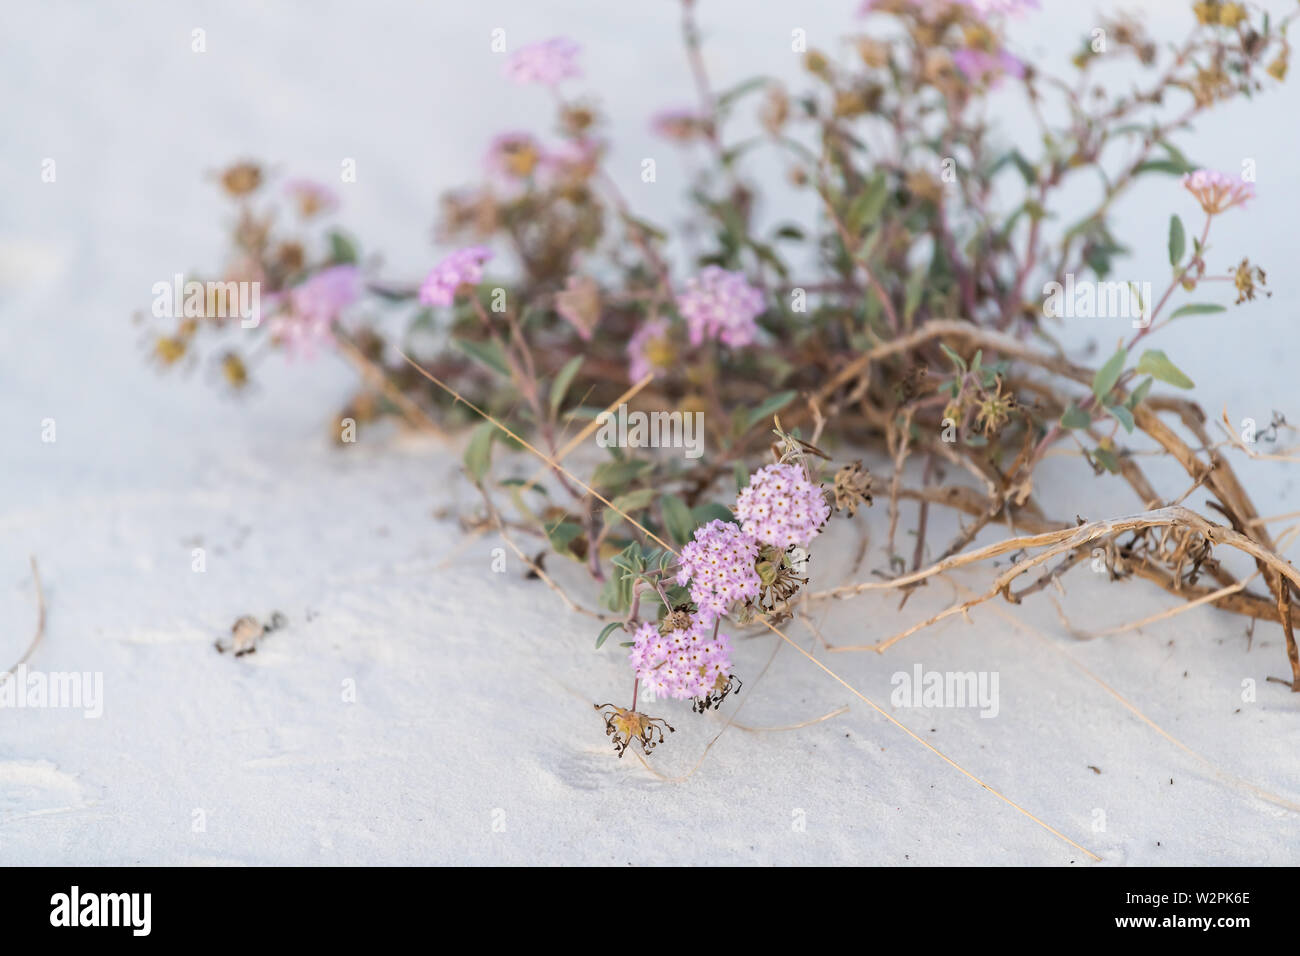 White sands dunes national park in New Mexico with purple sand verbena pink flowers plant on ground Stock Photo